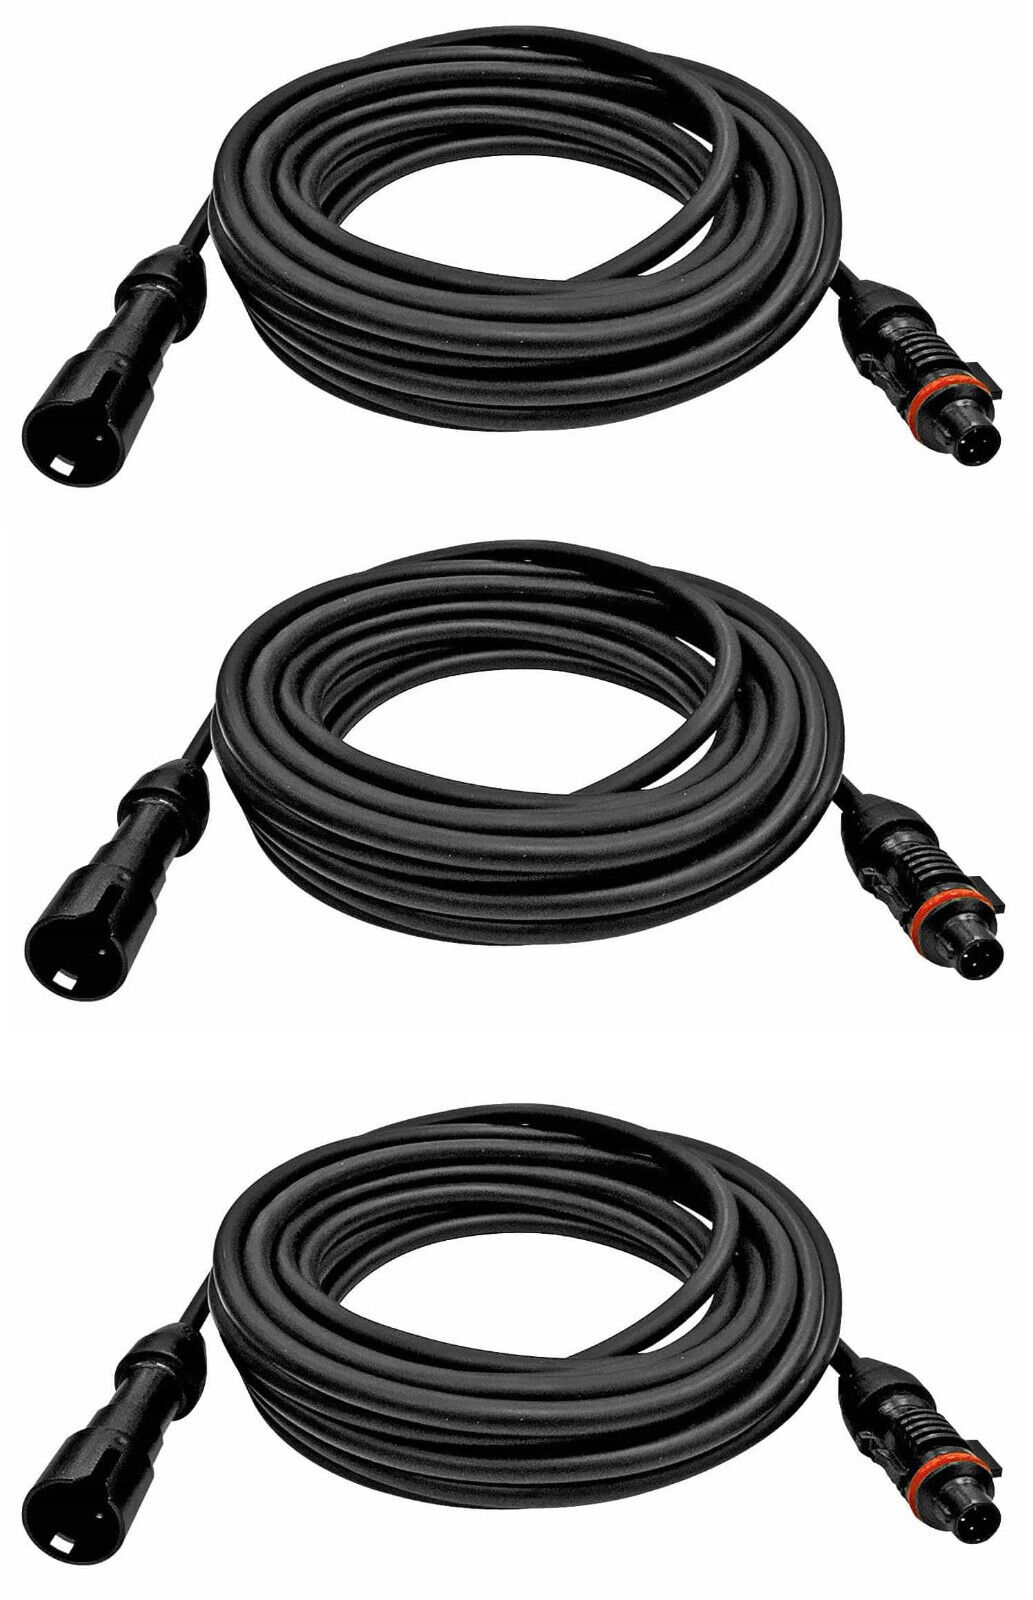 Voyager CEC15 Rear View LCD Monitor 15ft. Extension Cable (Pack of 3)